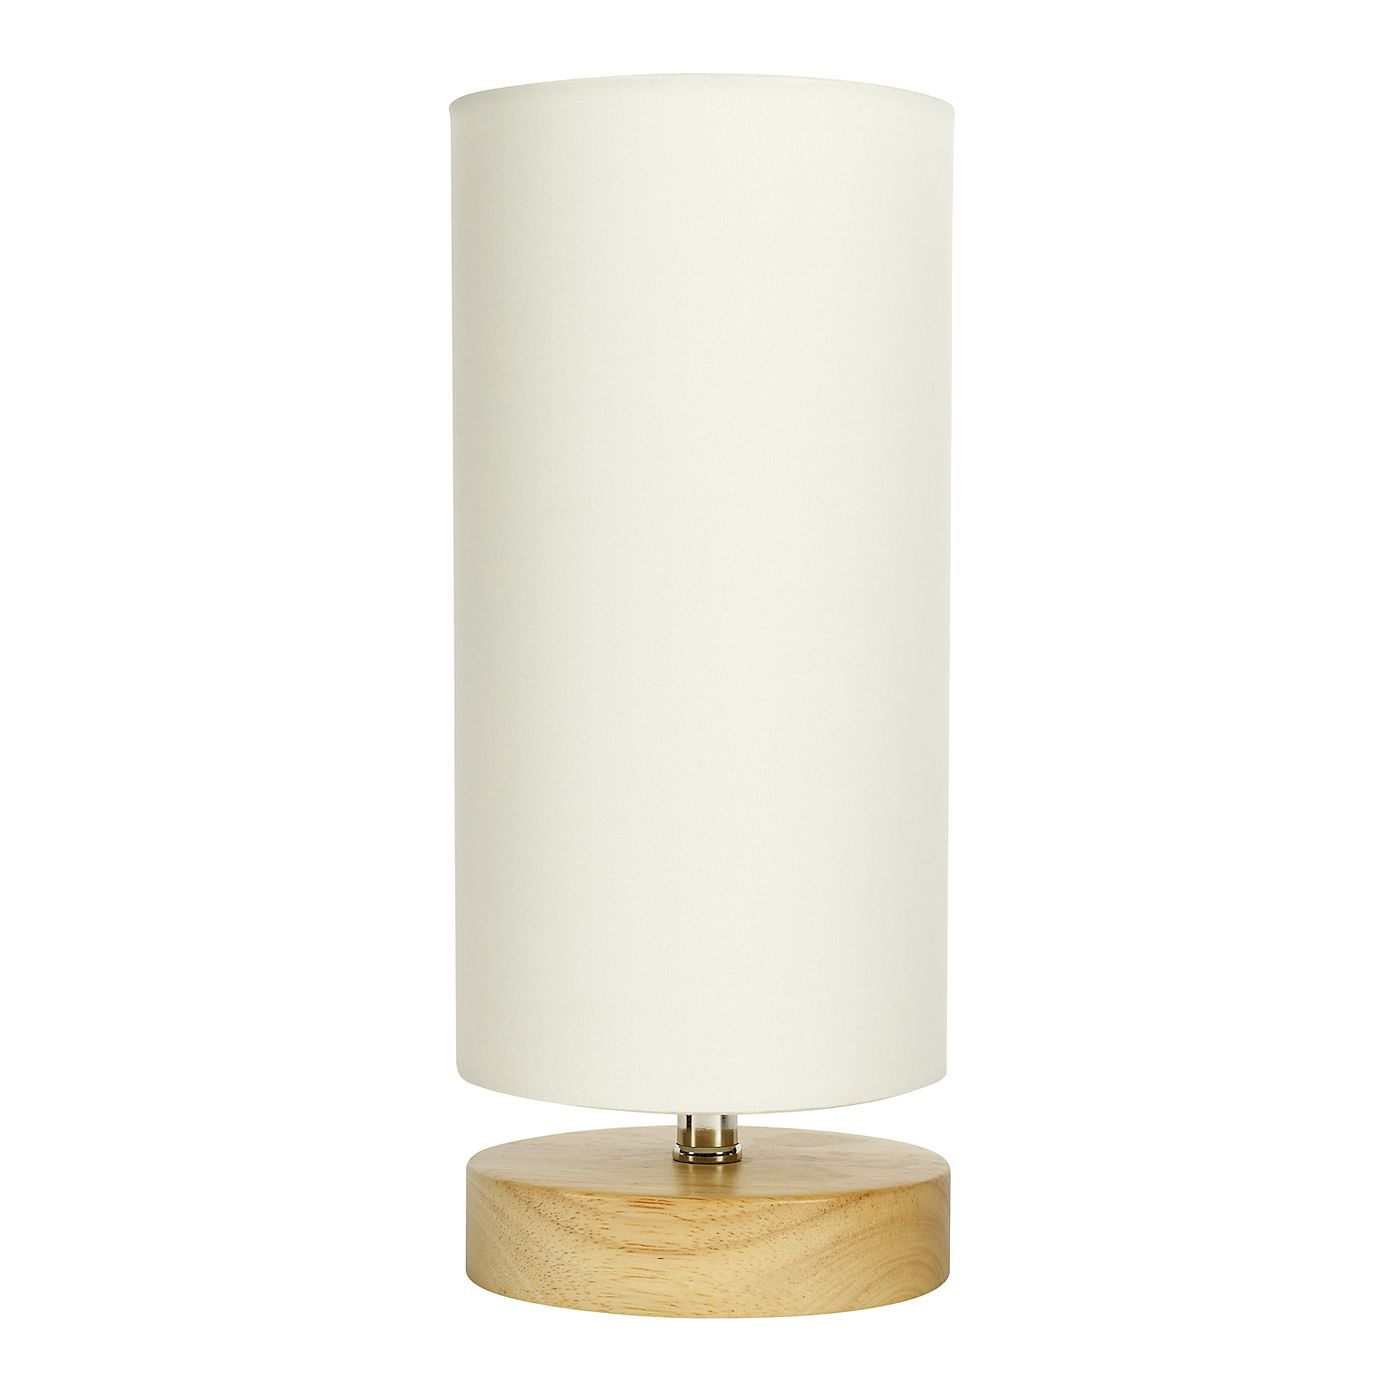 George Home Light Wood Cylinder Table Lamp Lighting Asda pertaining to measurements 1400 X 1400